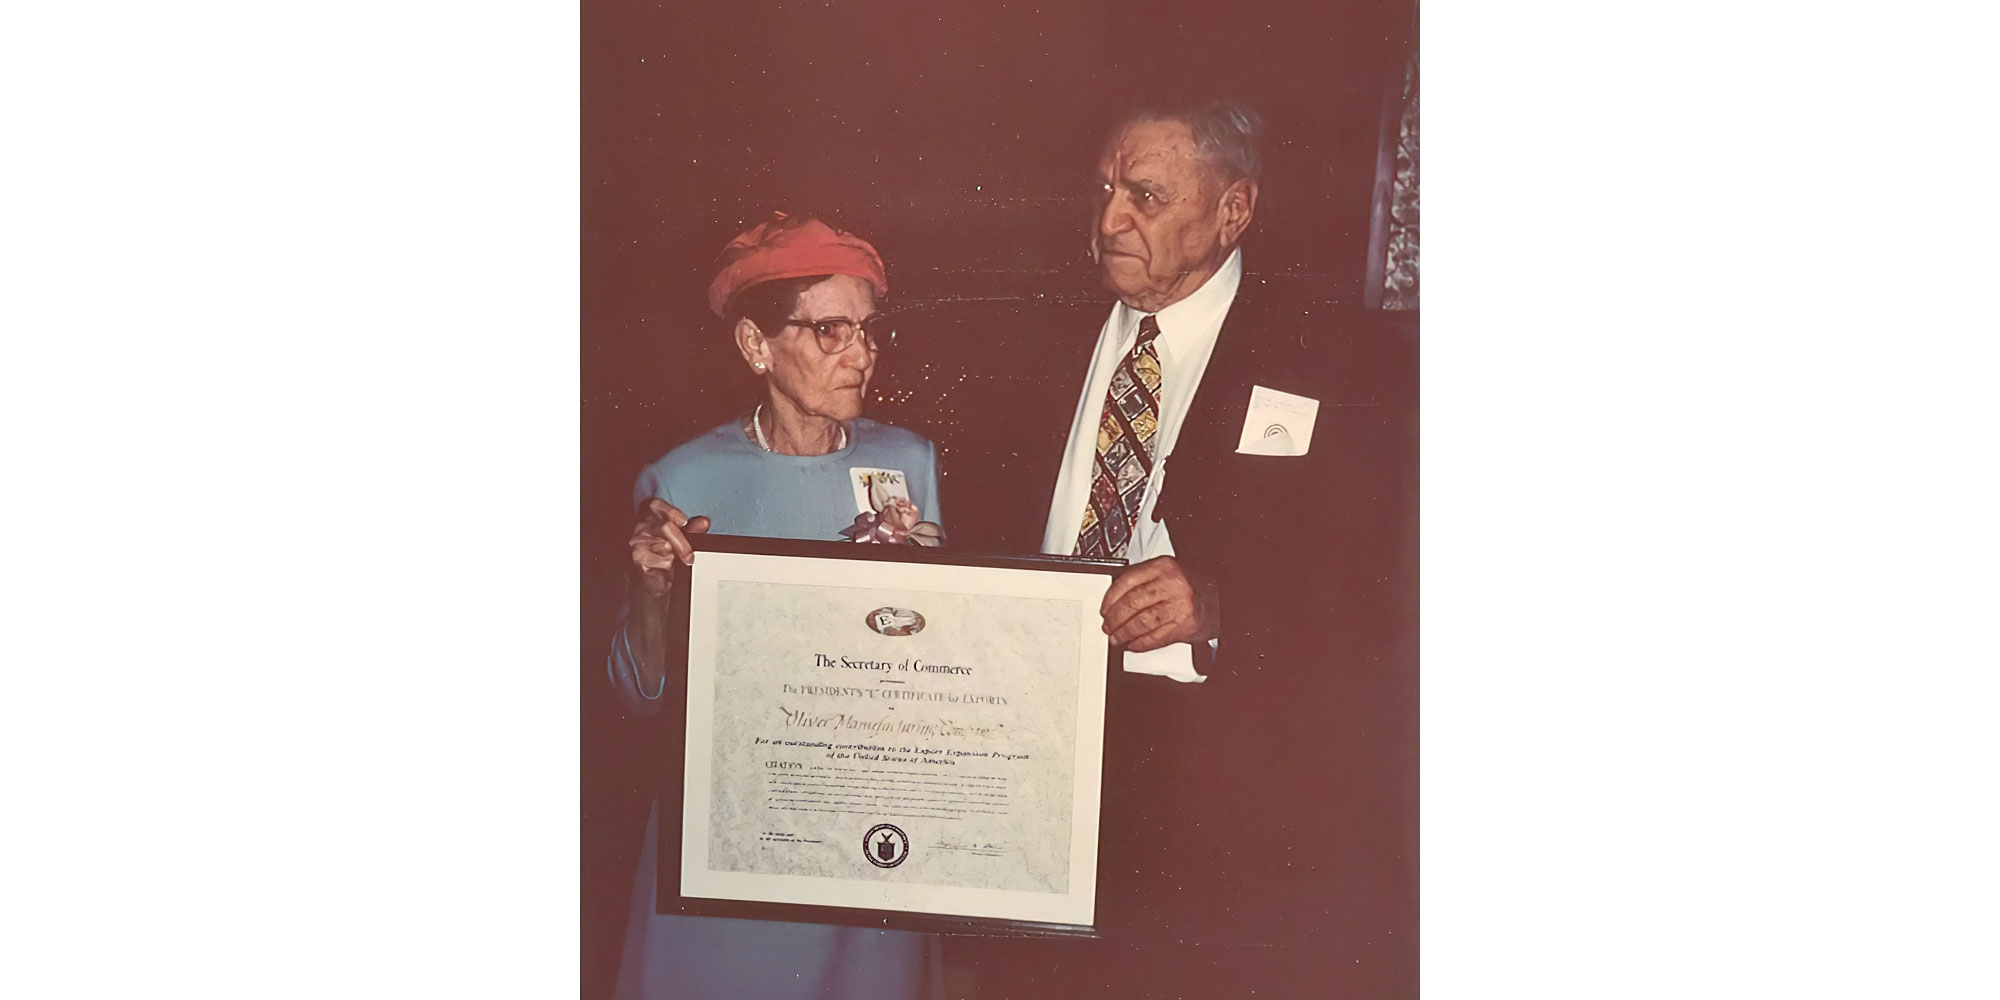 The Steele's celebrating Oliver's product export license in 1970.